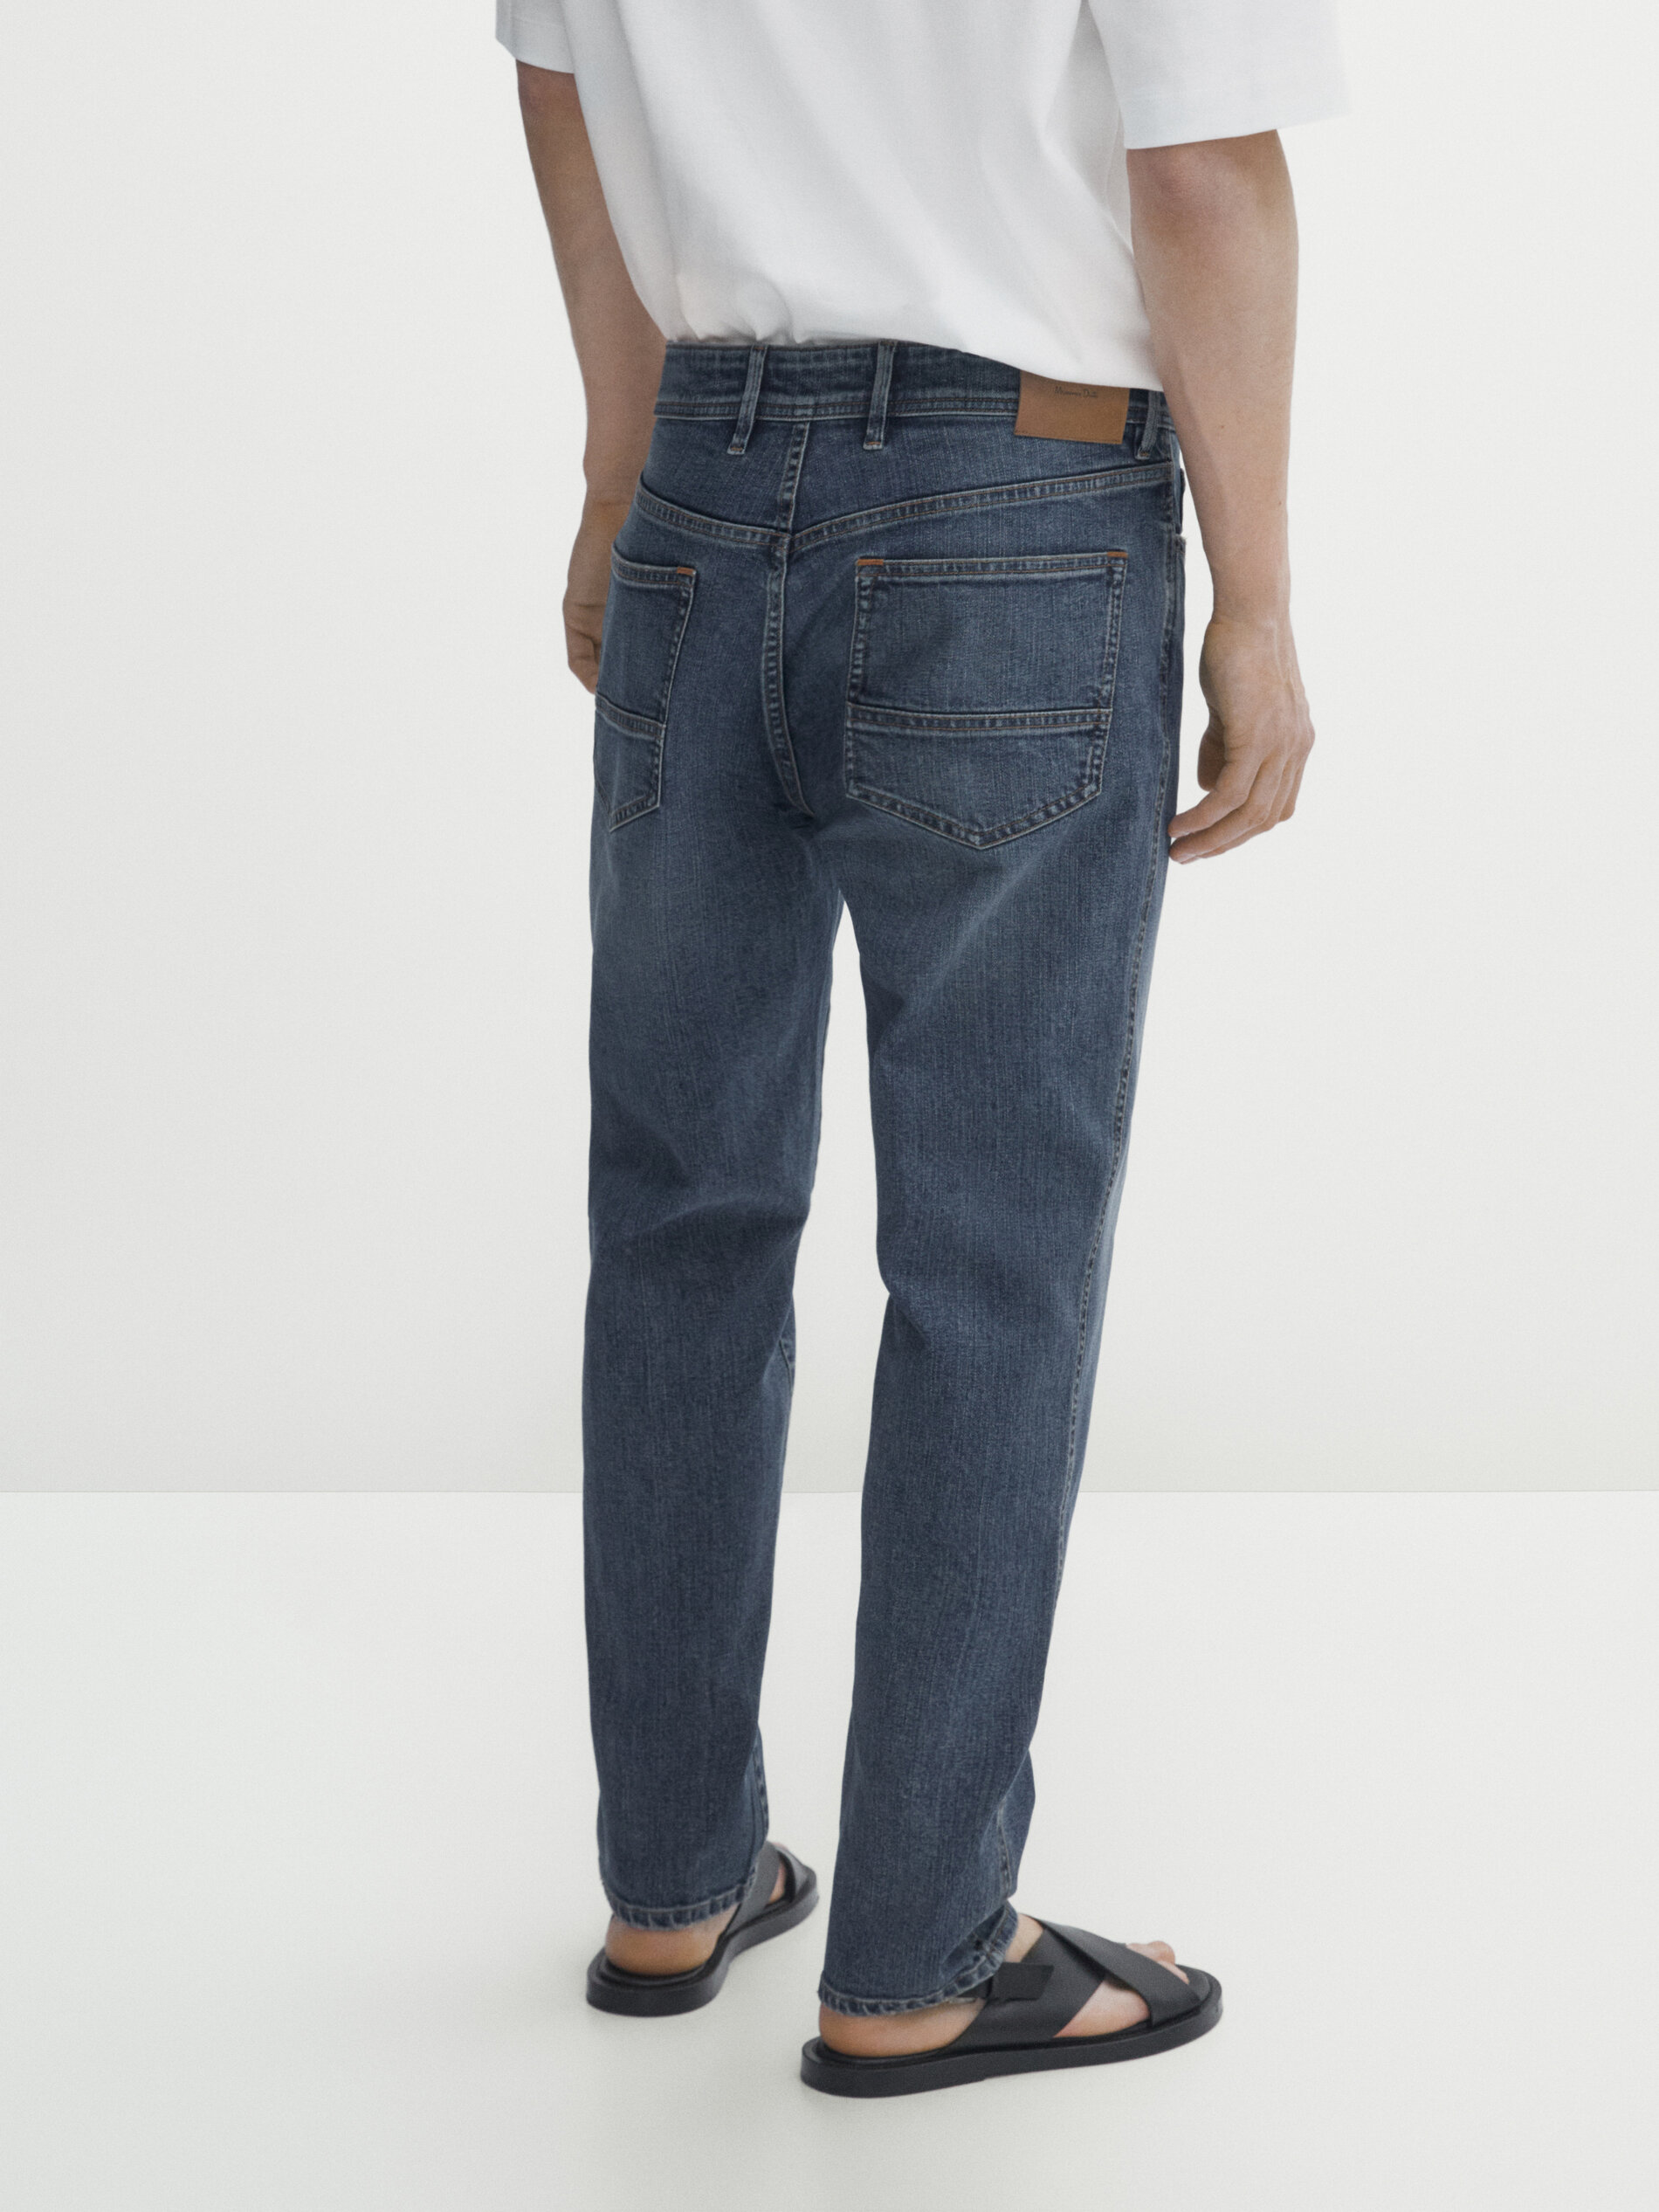 Jeans dirty wash tapered fit